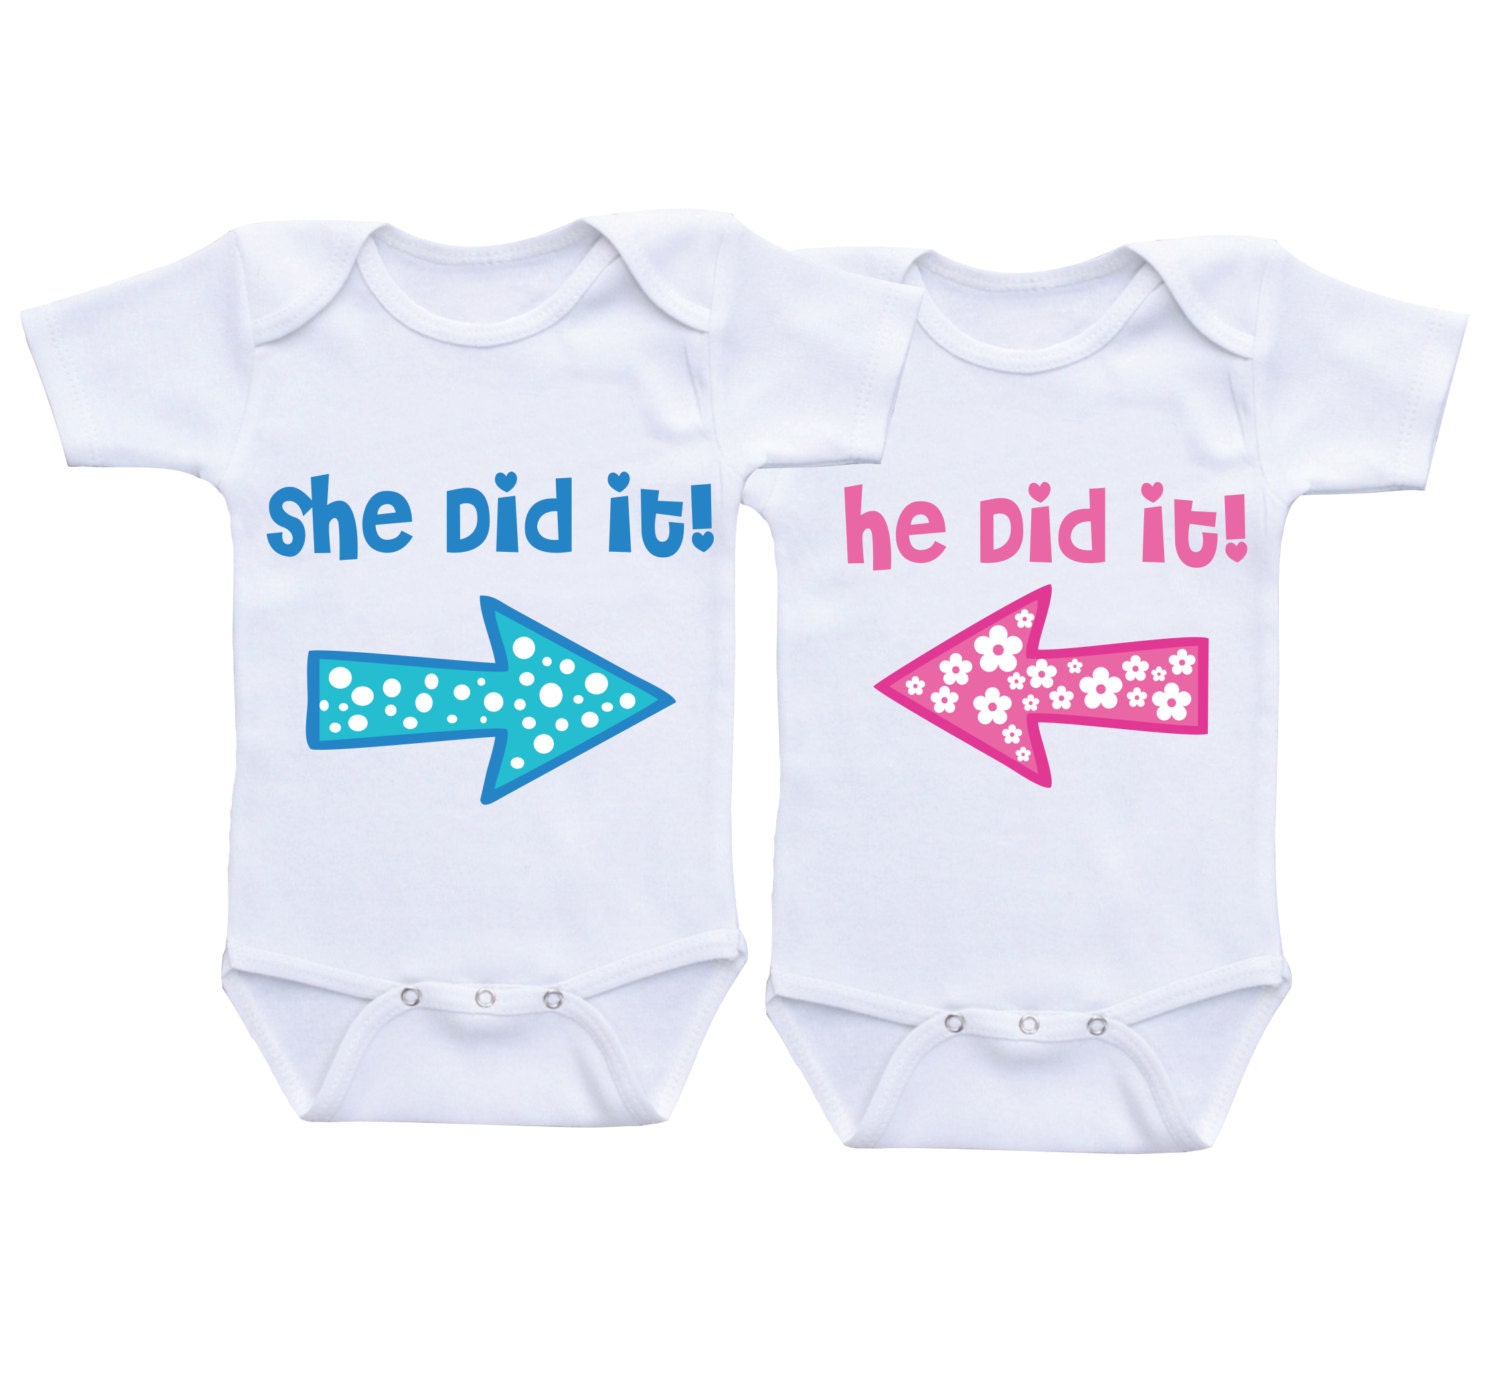 Image for funny baby gifts uk